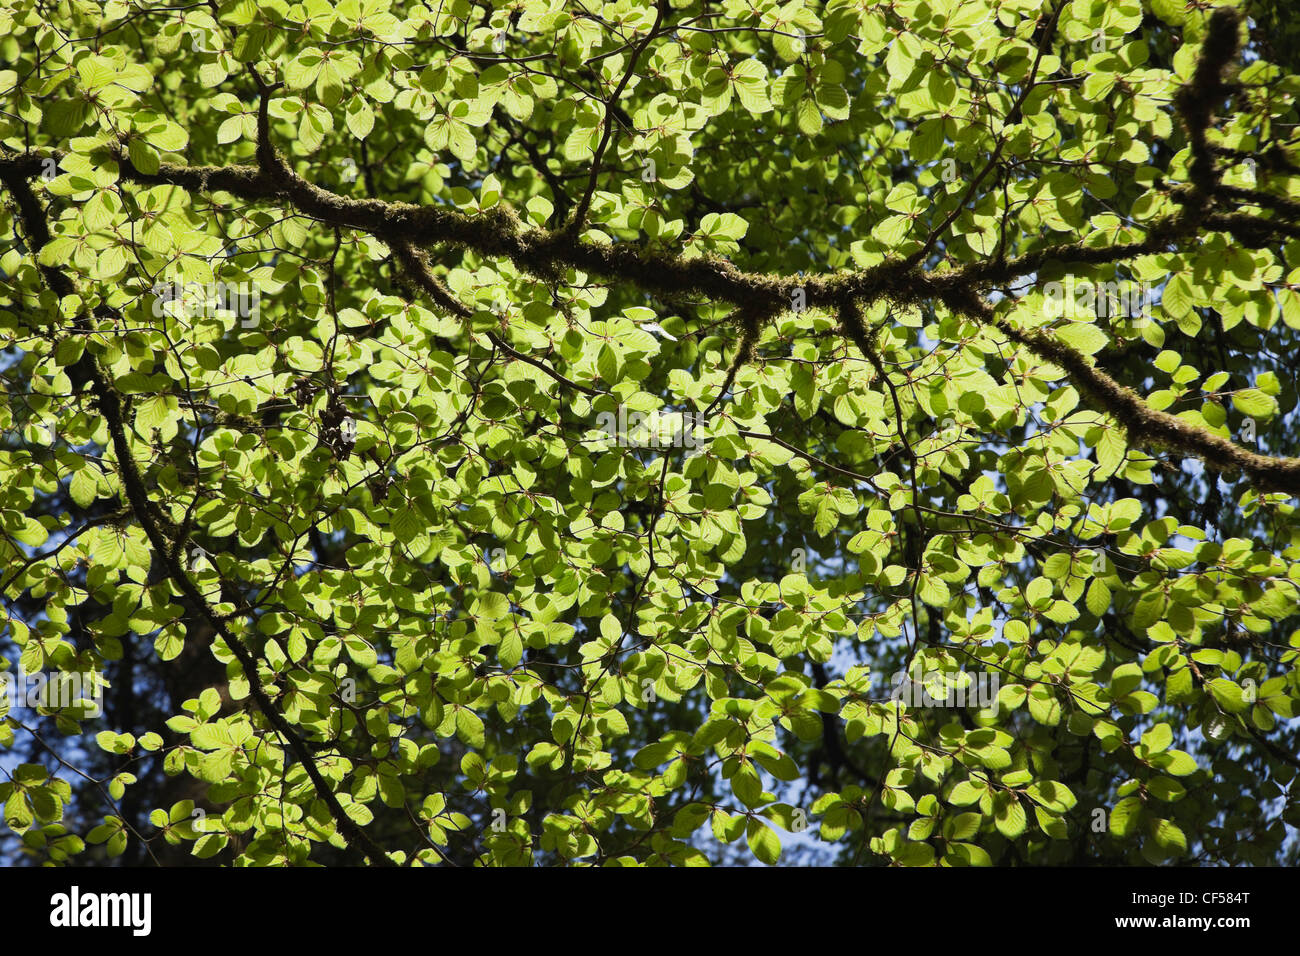 Germany, Rhineland-Palatinate, View of beech tree in nature park Stock Photo